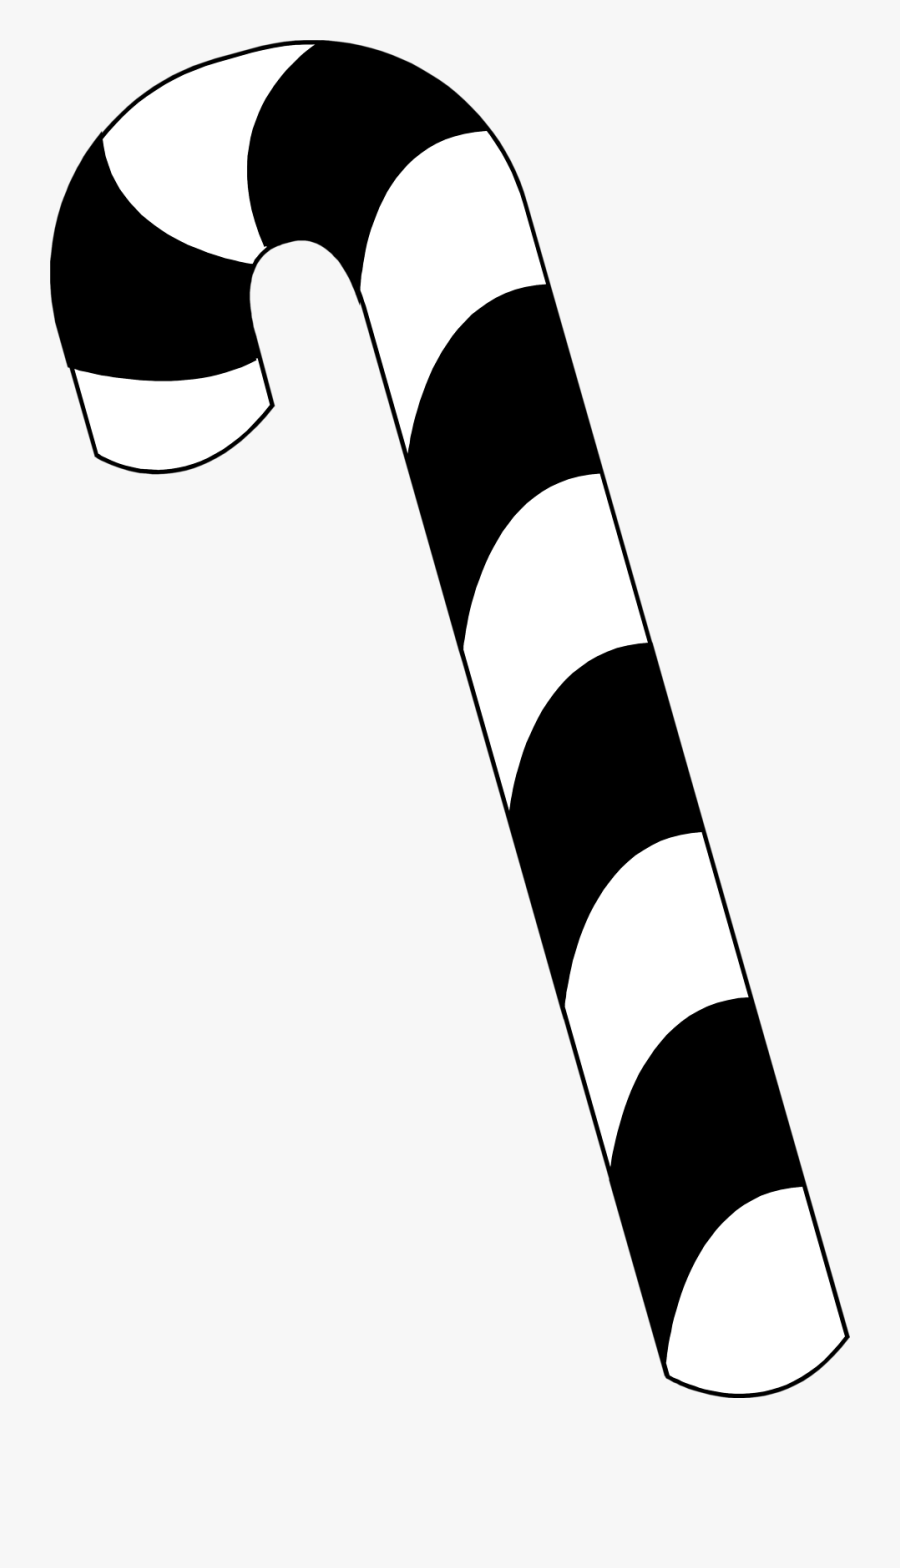 Free Candy Cane Template Printables Clip Art Image Candy Cane Black